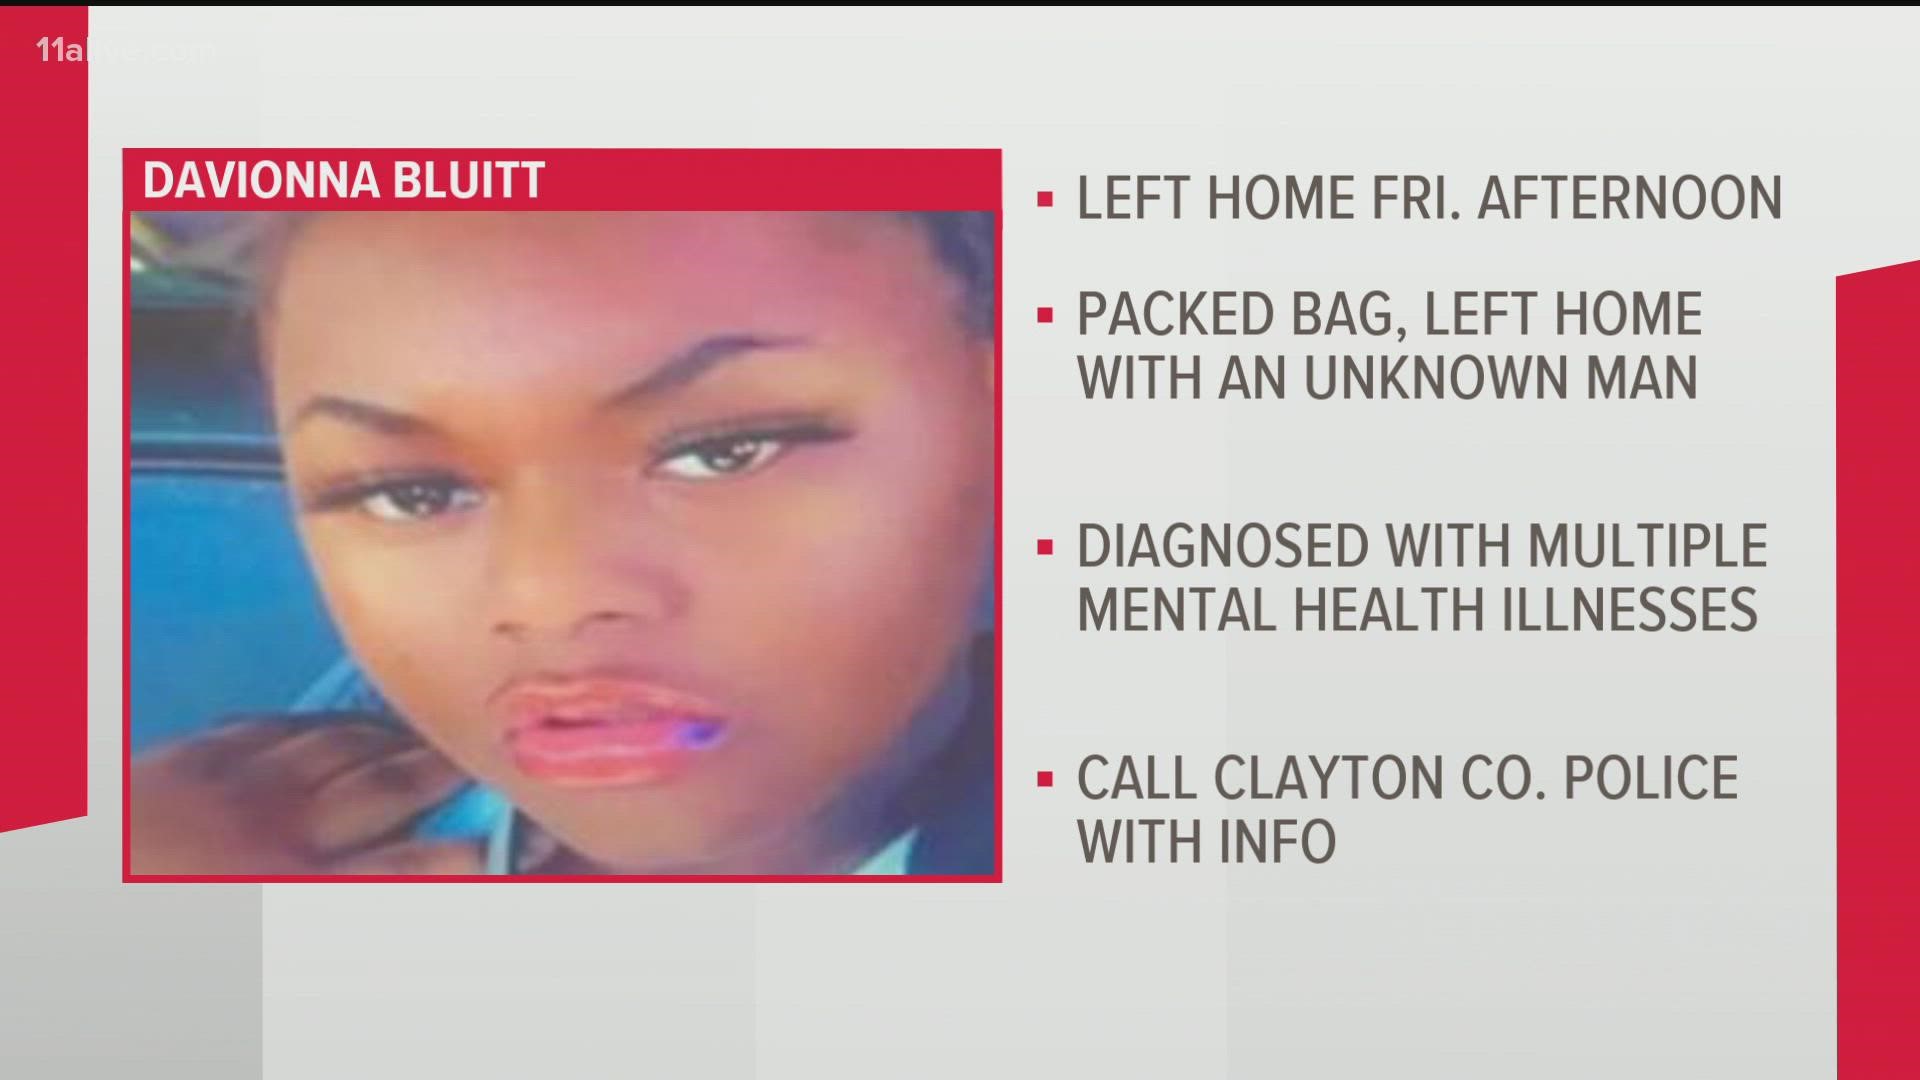 Clayton County Police said Davionna has been diagnosed with multiple mental health illnesses.